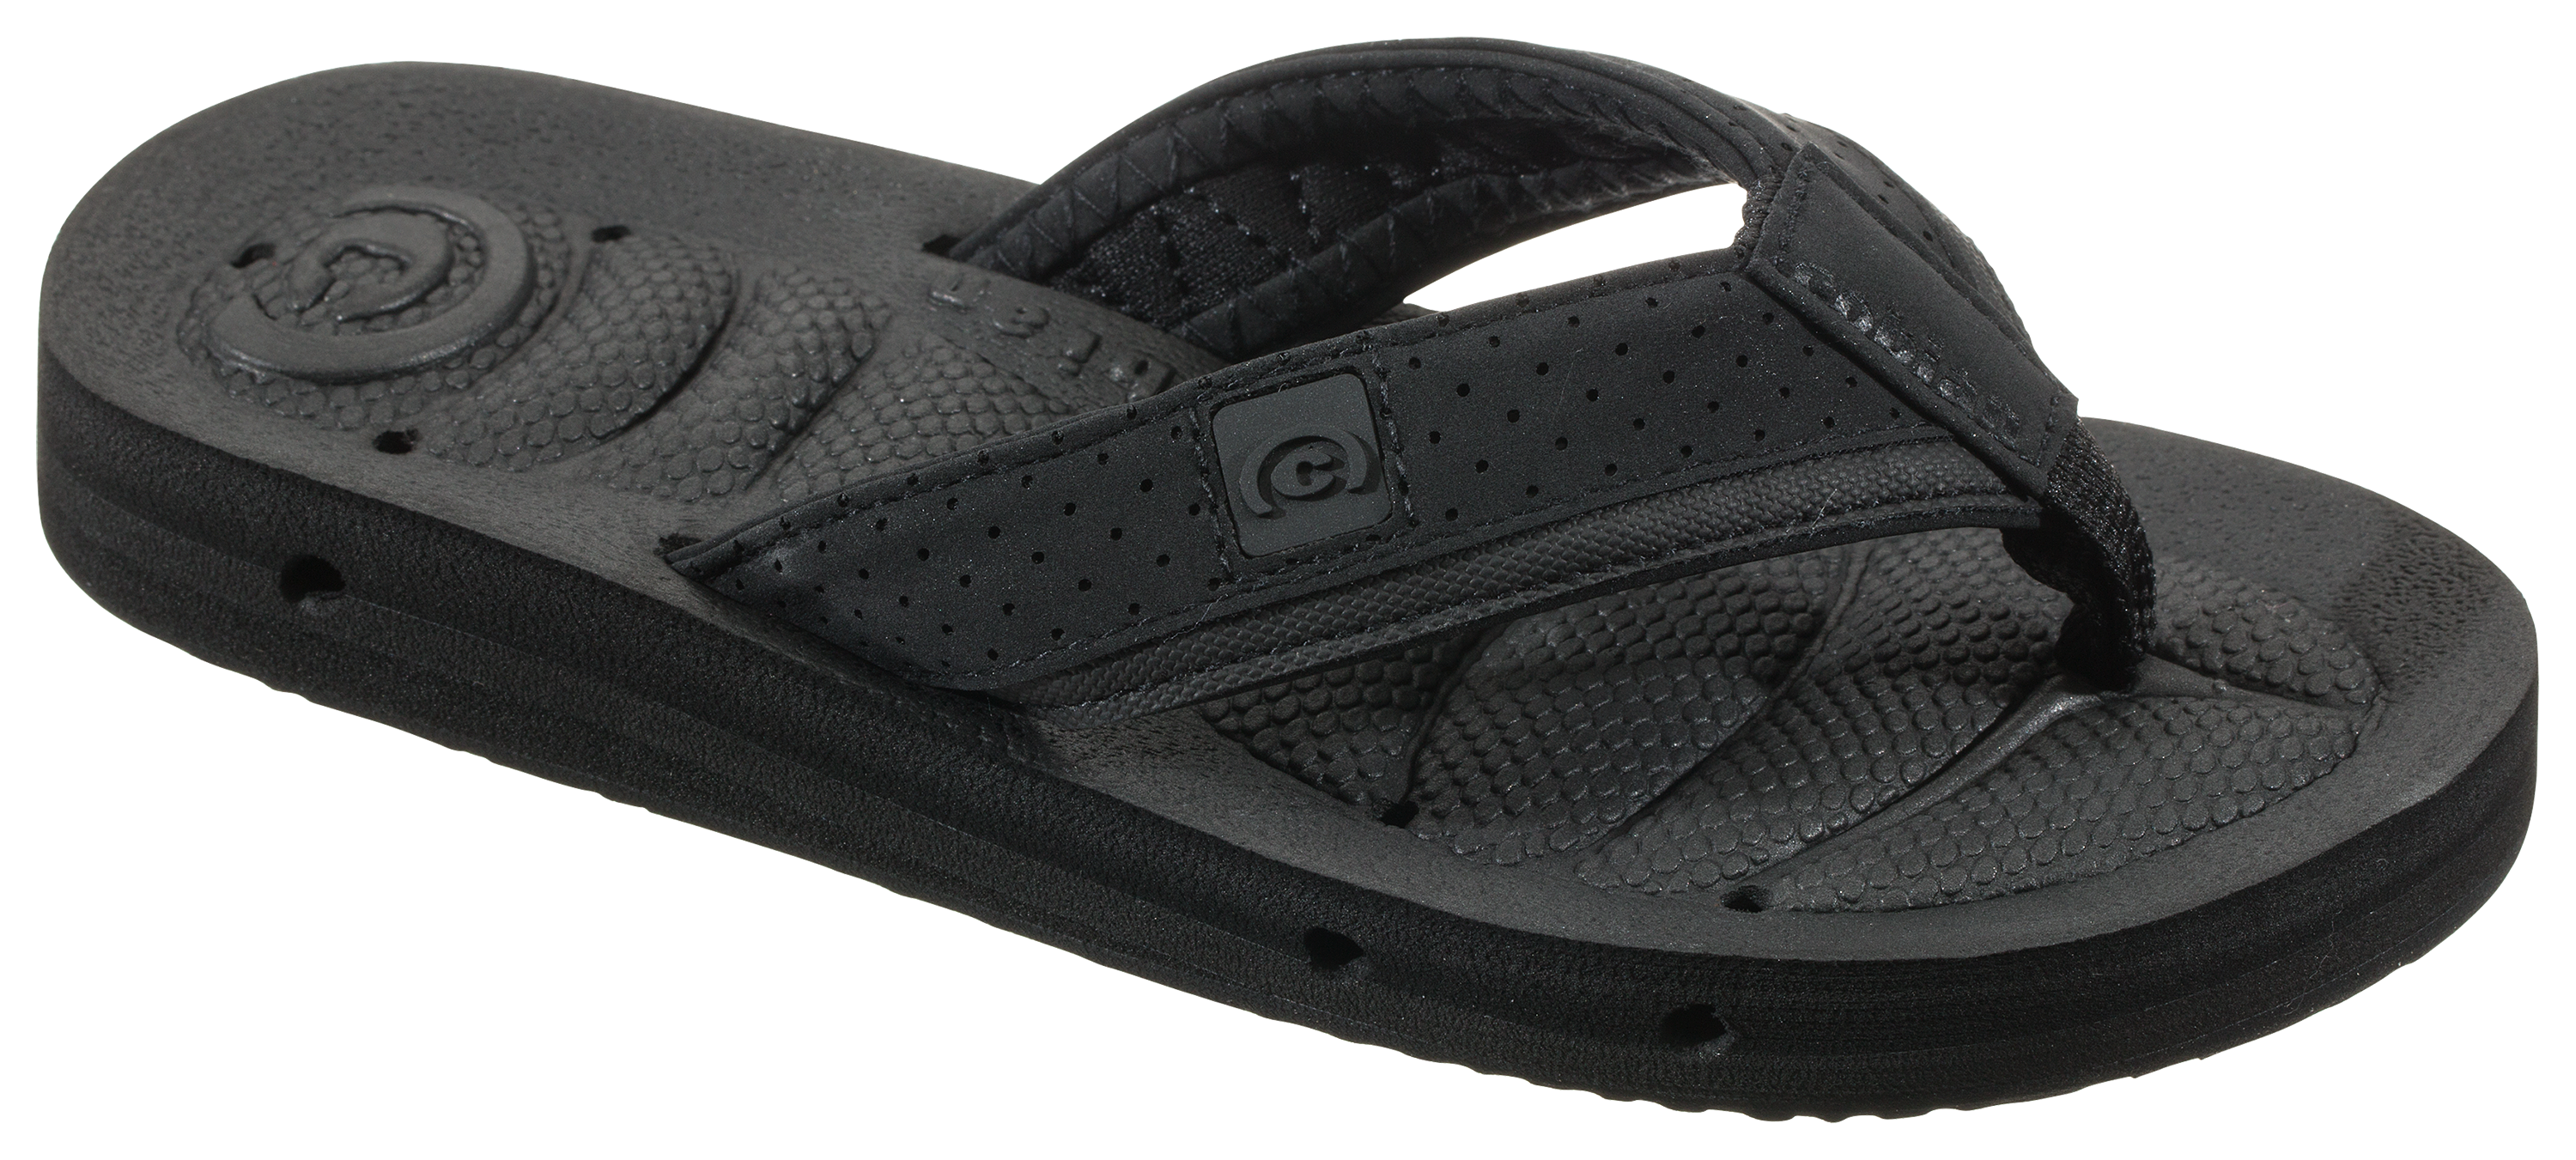 Cobian Draino 2 Jr. Sandals for Toddlers or Kids | Cabela's